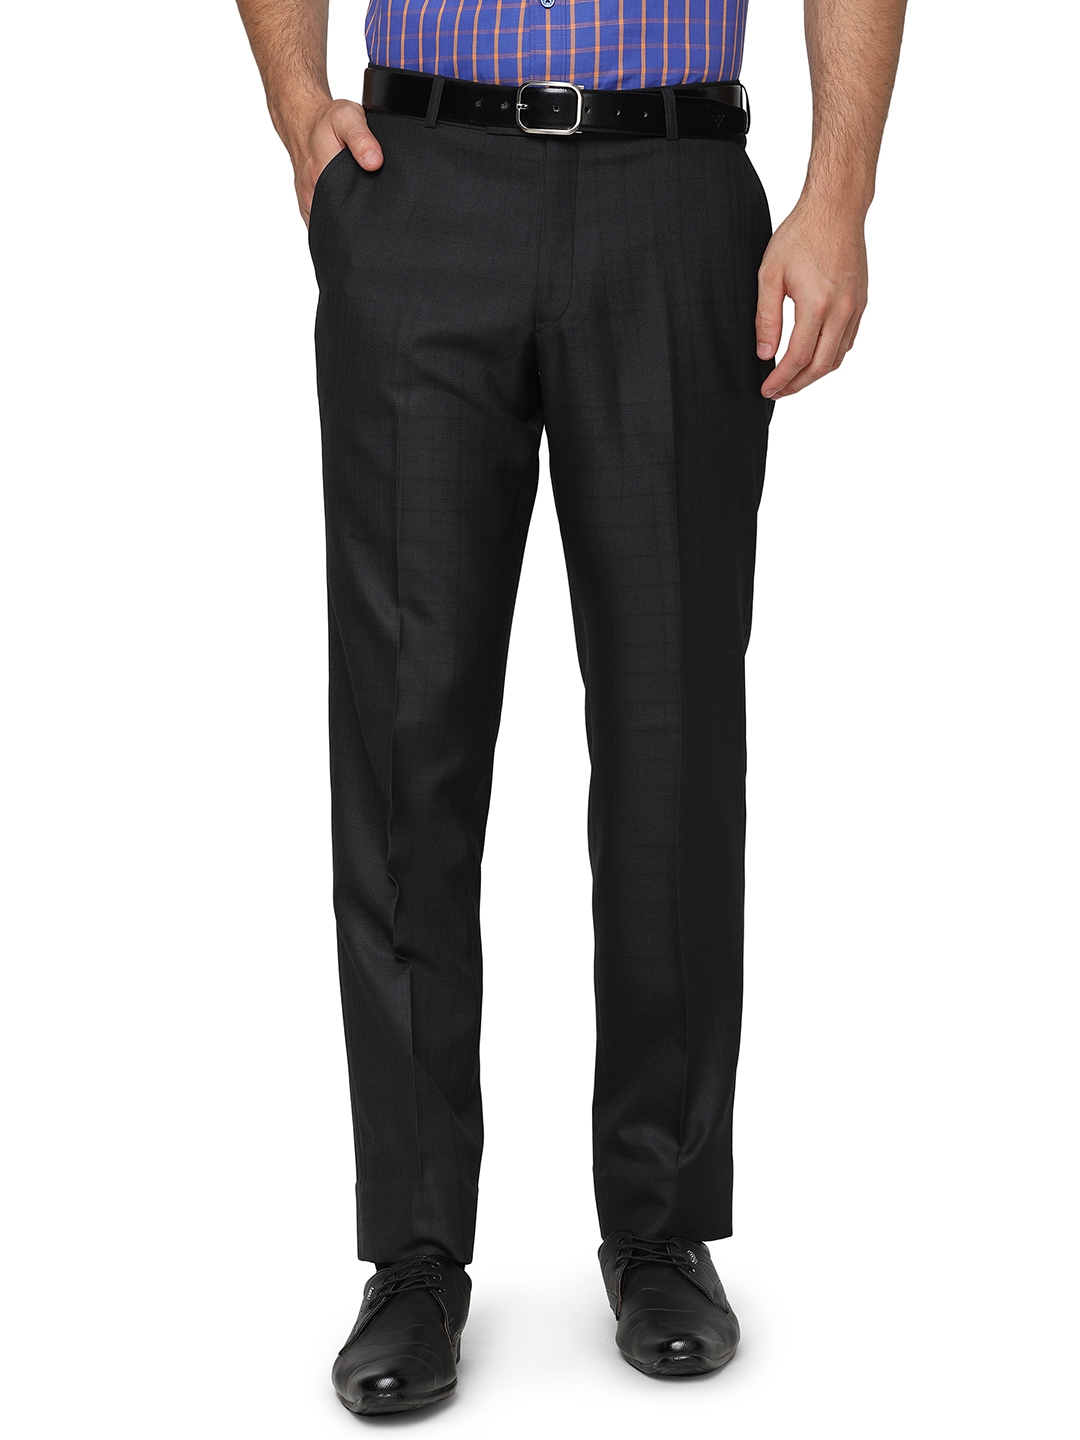 Greenfibre | Black & Grey Checked Classic Fit Formal Trouser | Greenfibre